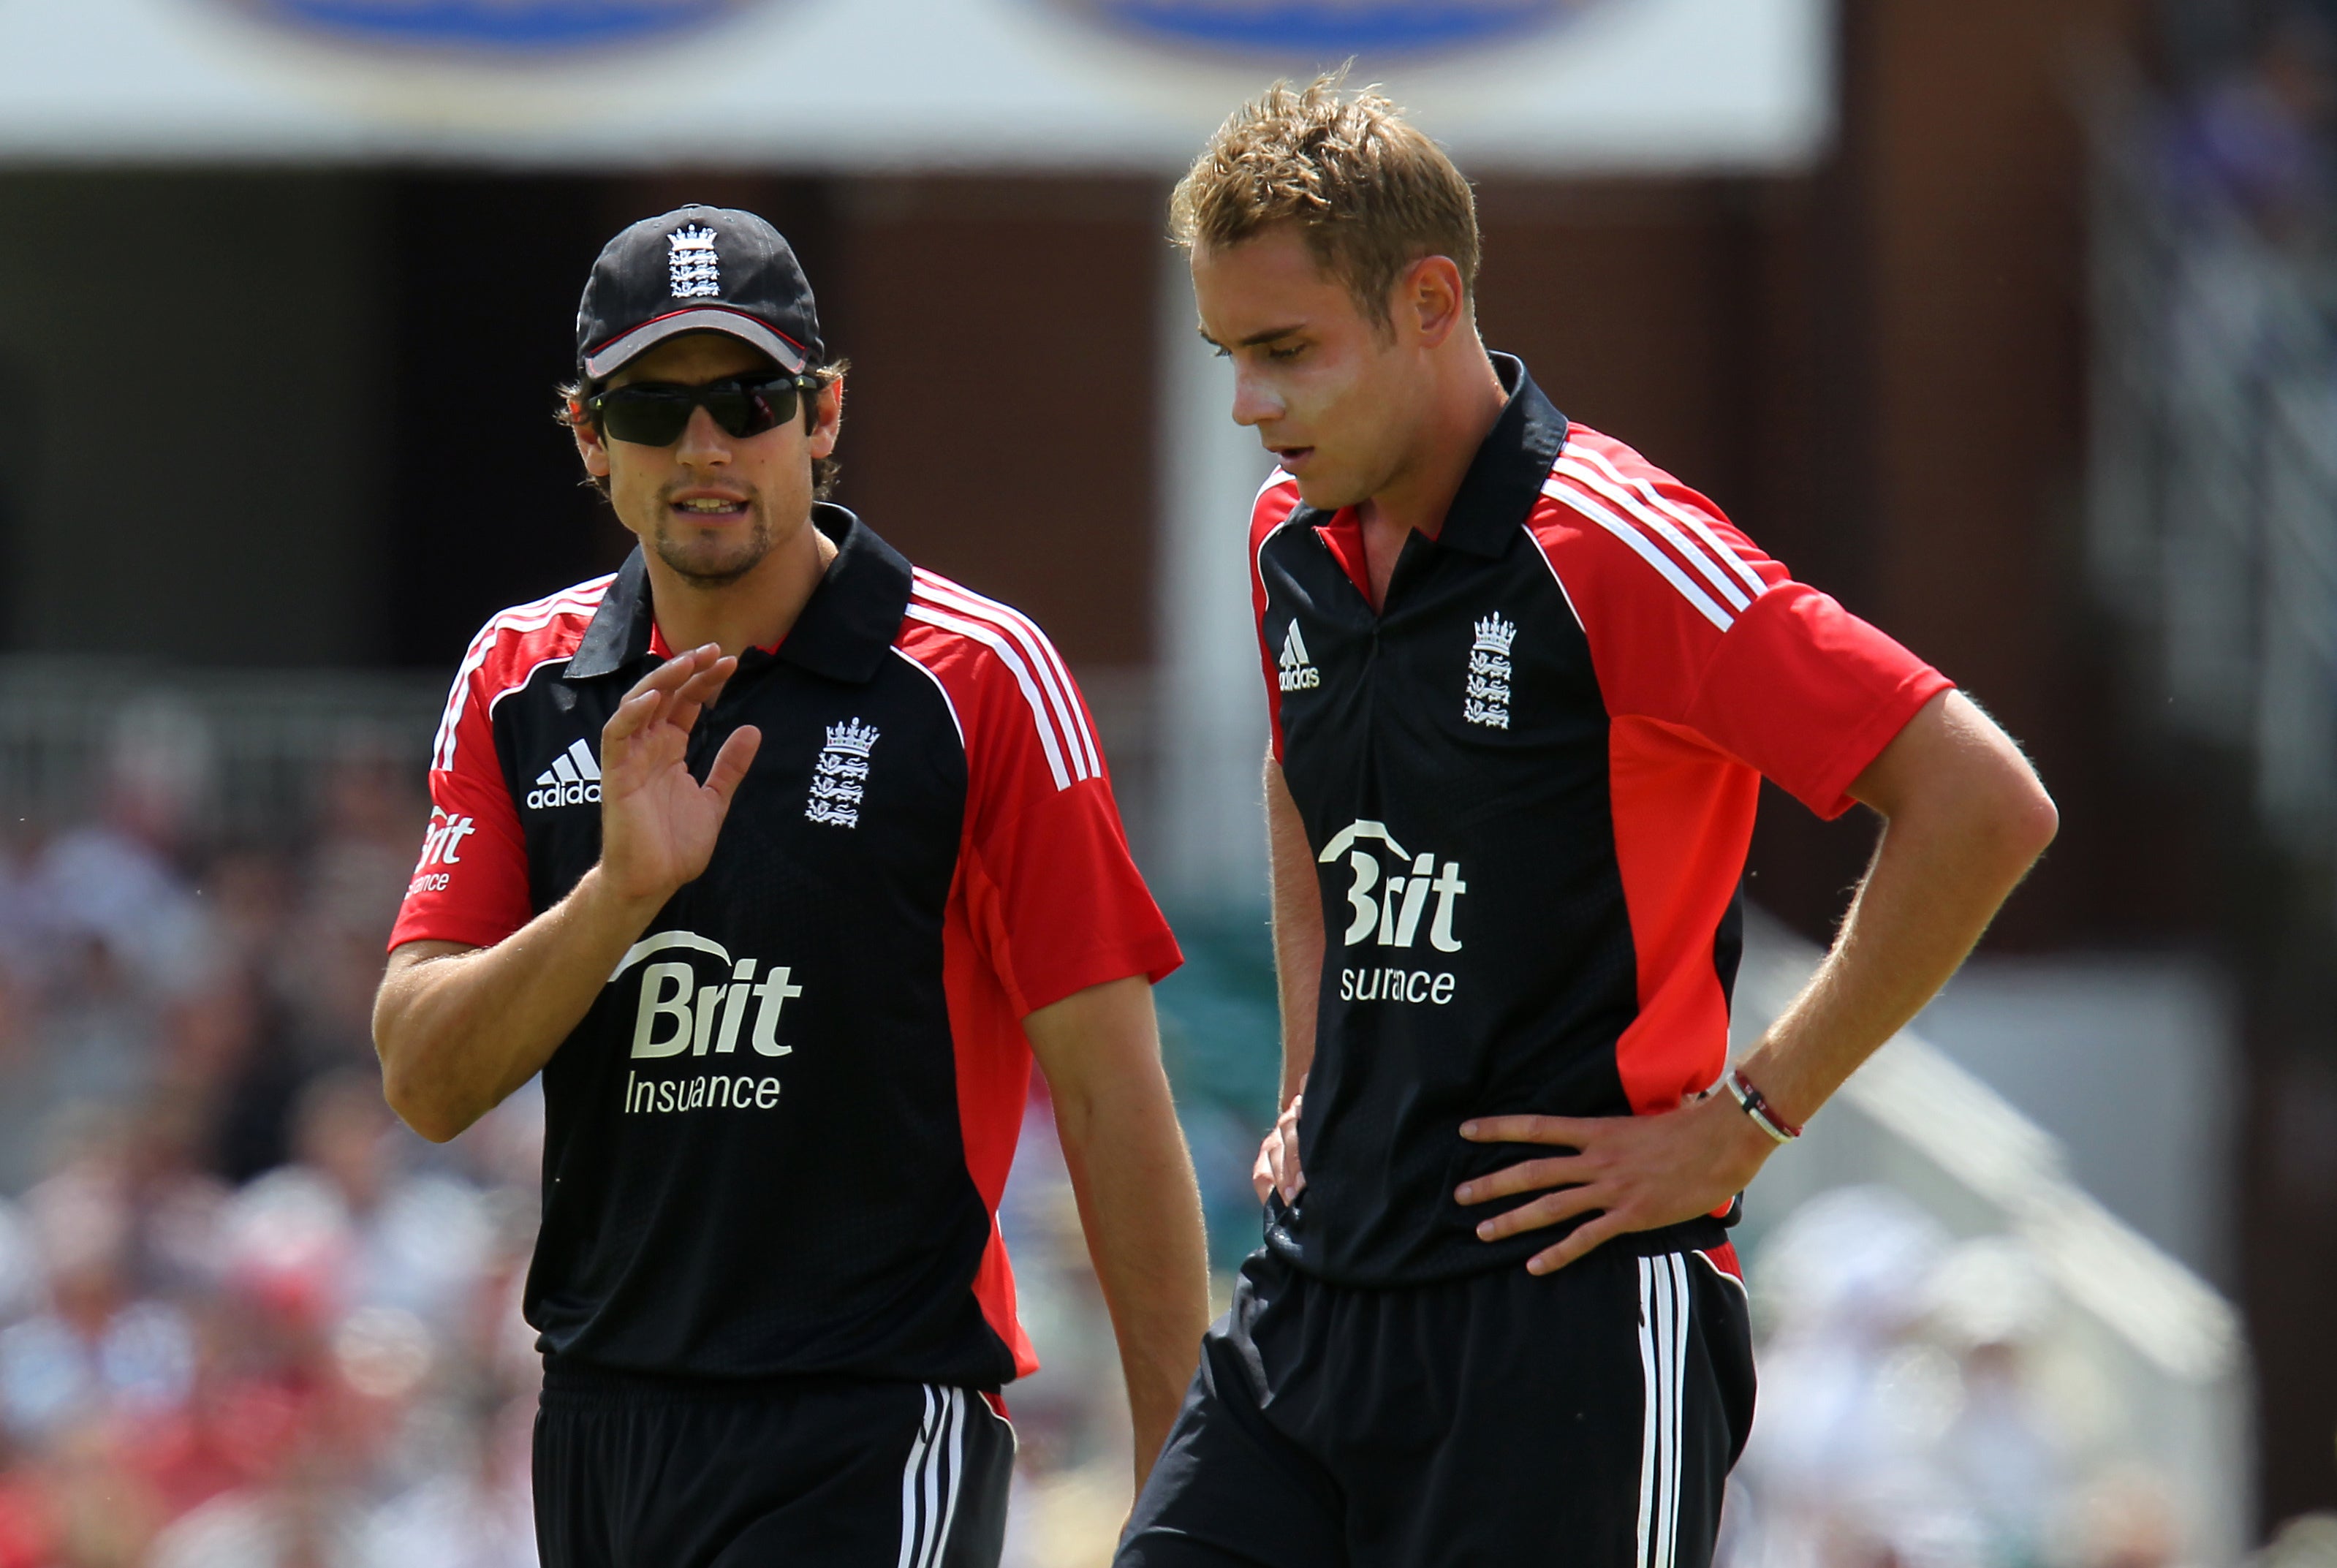 Alastair Cook (left) replaced Andrew Strauss as ODI captain, while Stuart Broad (right) succeeded Paul Collingwood as T20 skipper (David Davies/PA)